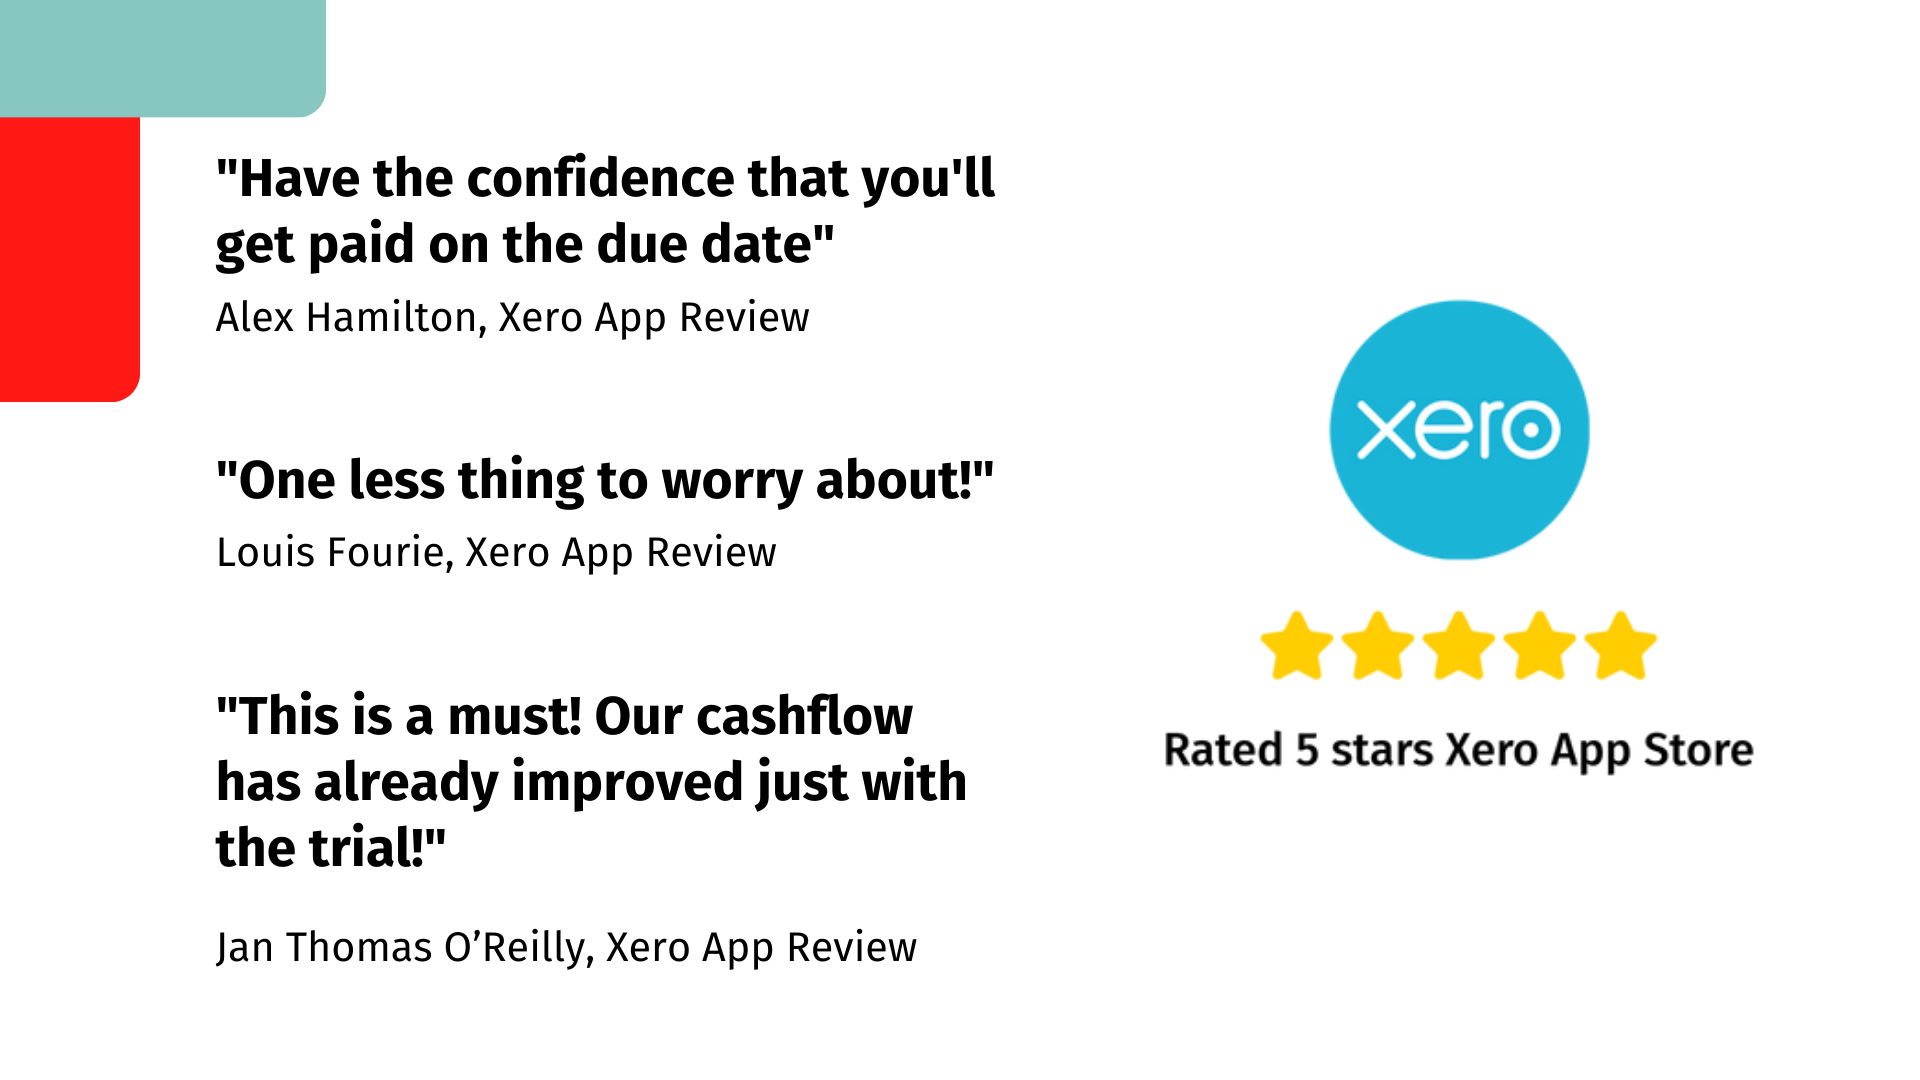 Rated 5 stars on the Xero app store